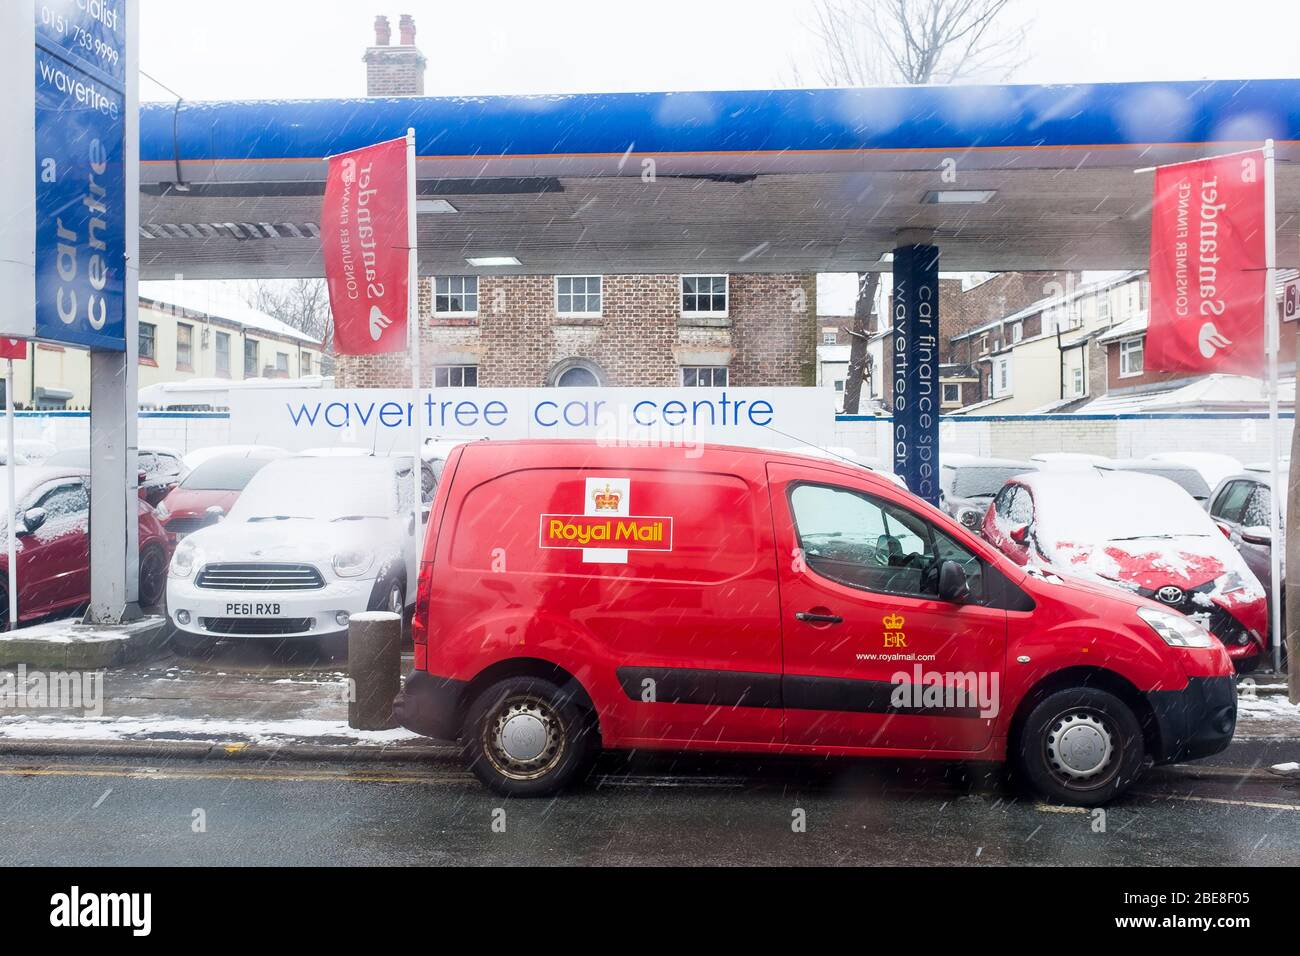 A Royal Mail van parked in front of a used car dealership on Wavertree High Street in Urban Liverpool, England Stock Photo